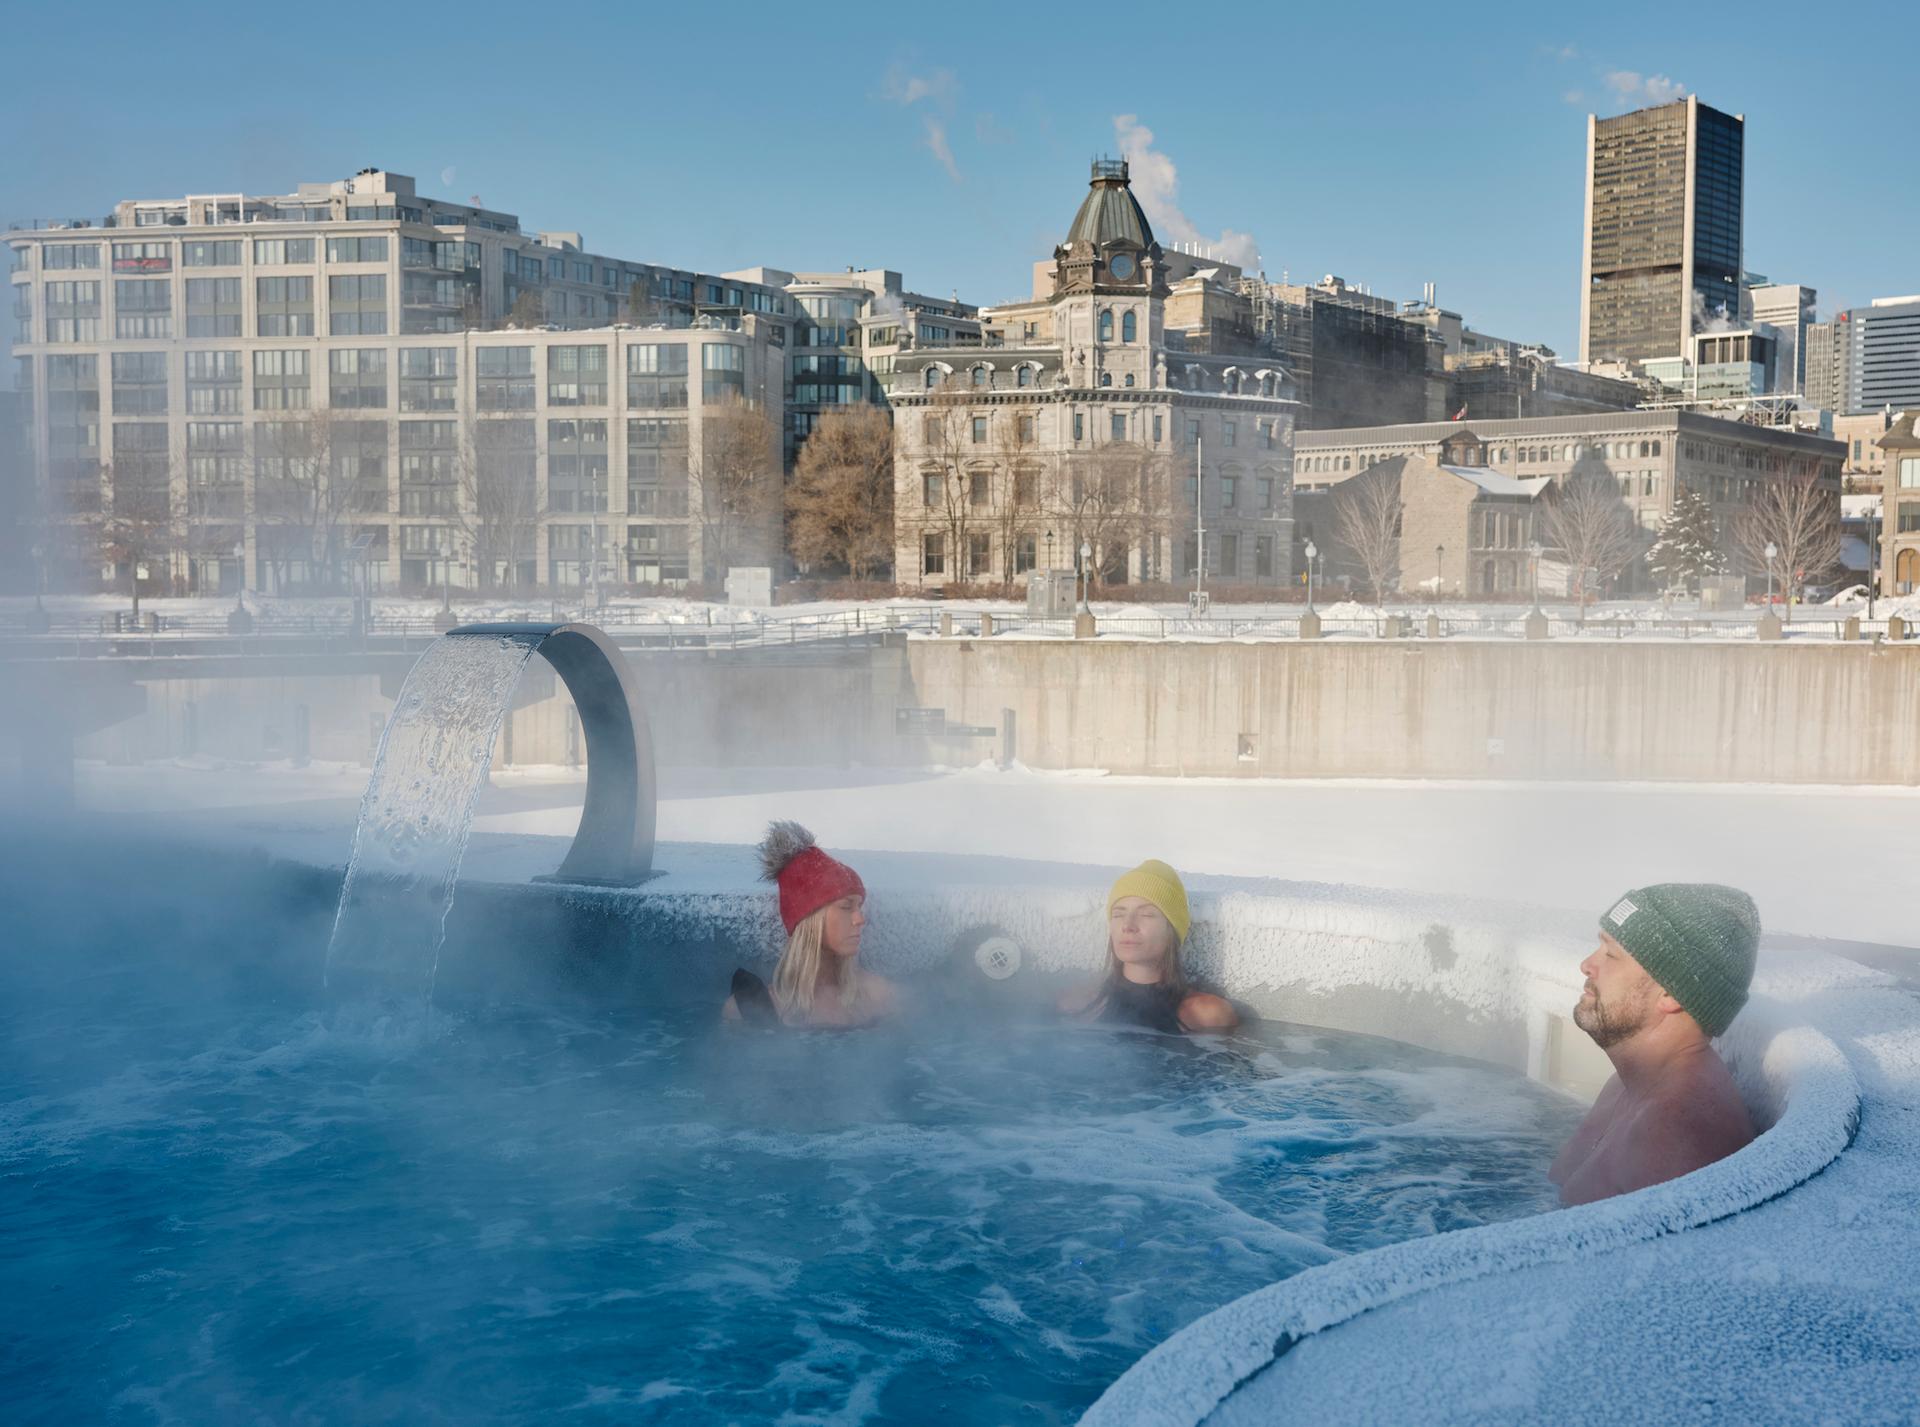 People soak in an outdoor thermal pool at Bota Bota spa in winter in the Old Port of Montreal